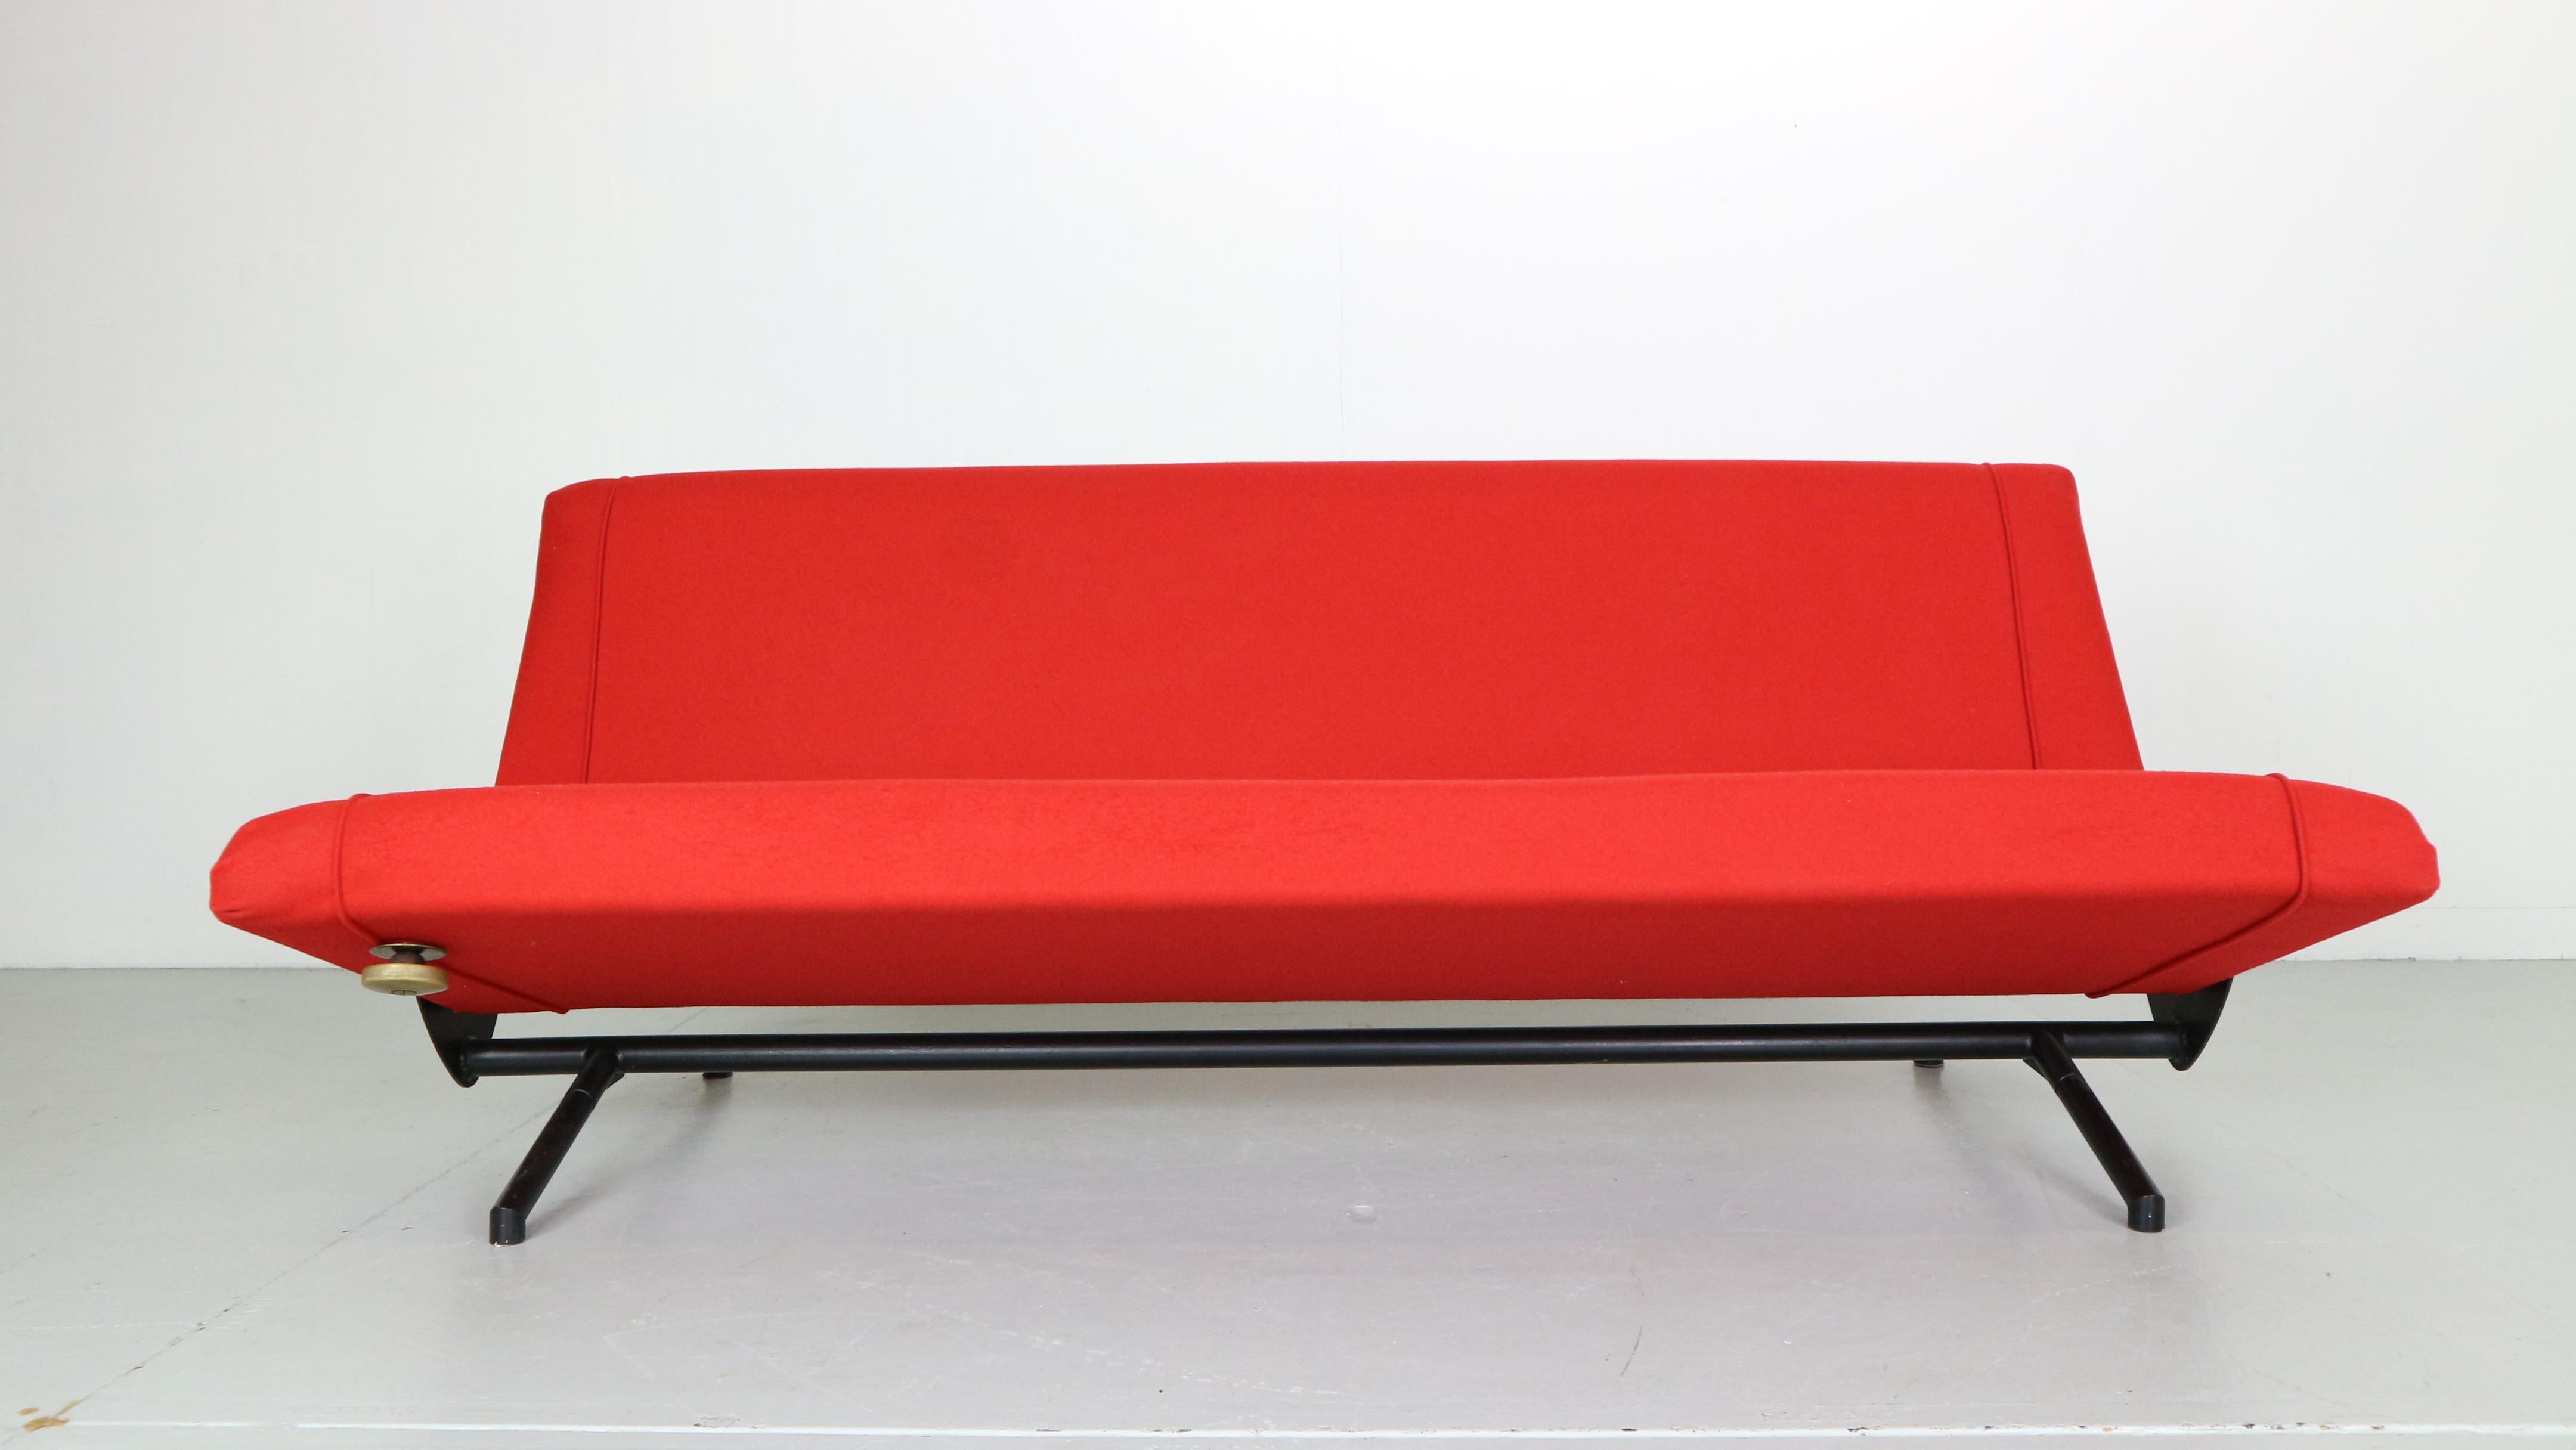 A sofa that transforms to a daybed designed by Osvaldo Borsani in 1954 and manufactured for Tecno, Italy.

Extraordinary elegance in form, and also outstanding in a technical sense. With a single twist the back and seating are positioned upwards